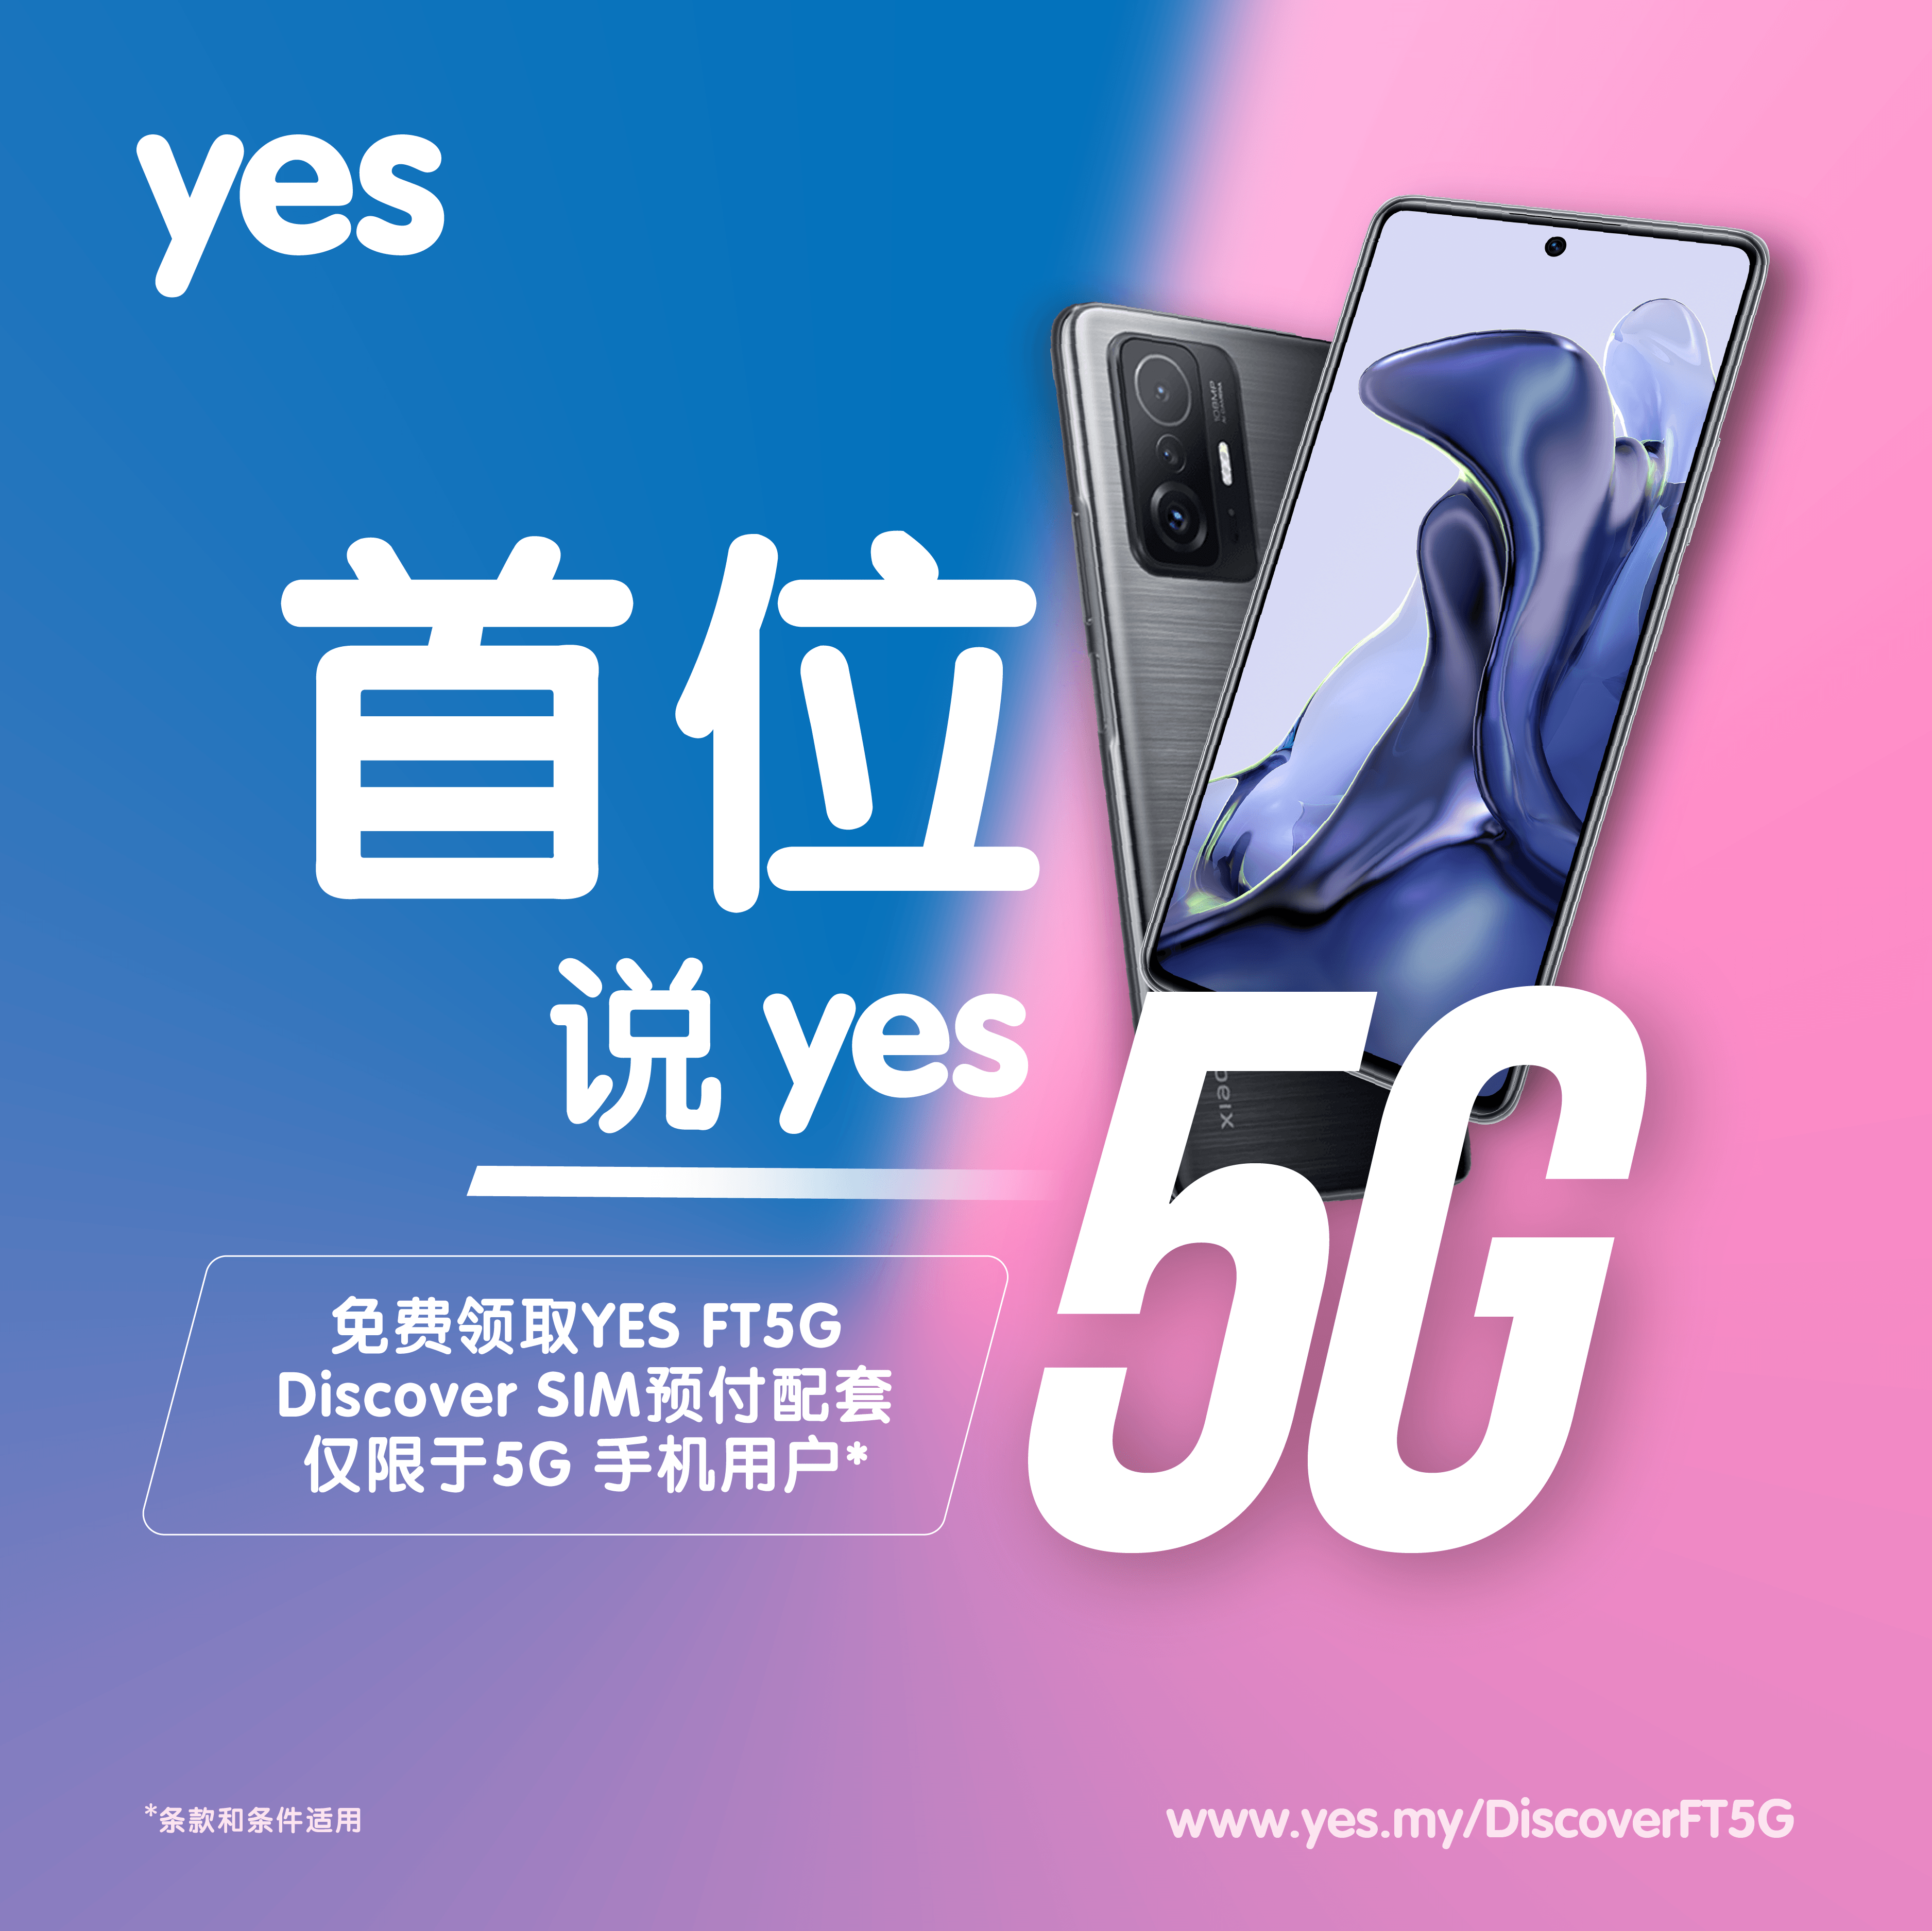 CHI YES First To Discover 5G